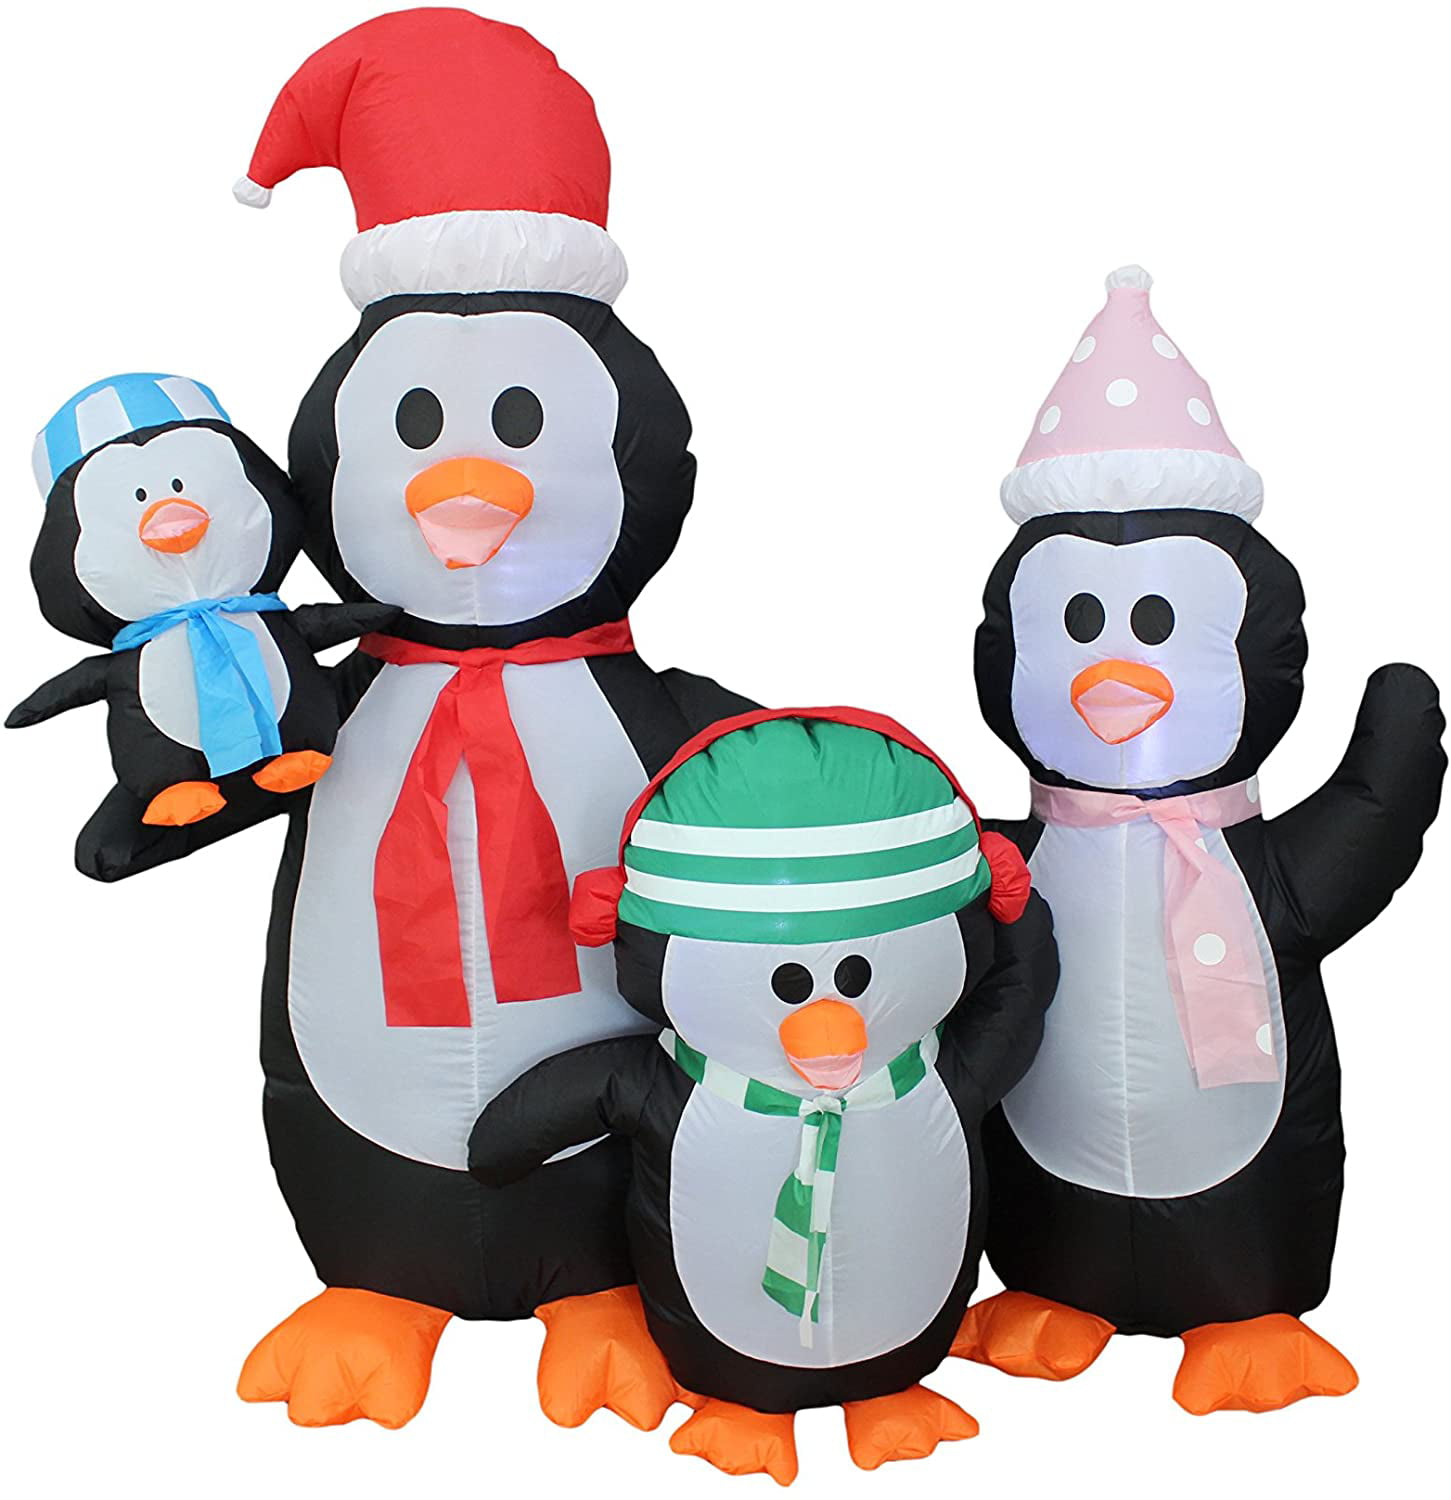 5 Inflatable Penguin Family Lighted Christmas Yard Art Decoration